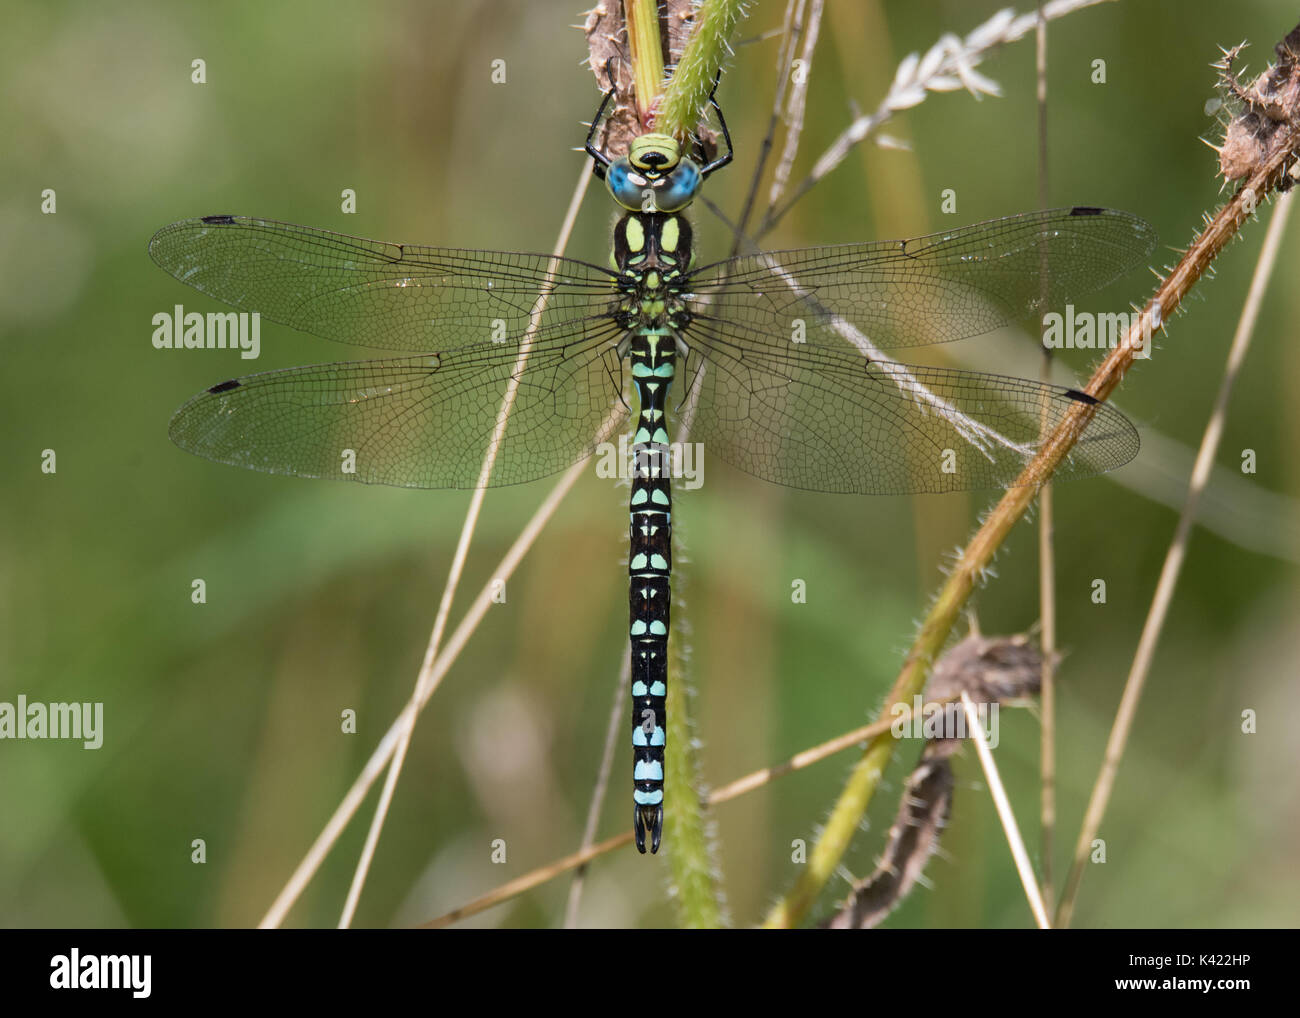 Southern hawker (Aeshna cyanea) male dorsal view. Large insect in the order Odonata, family Aeshnidae, at rest Stock Photo